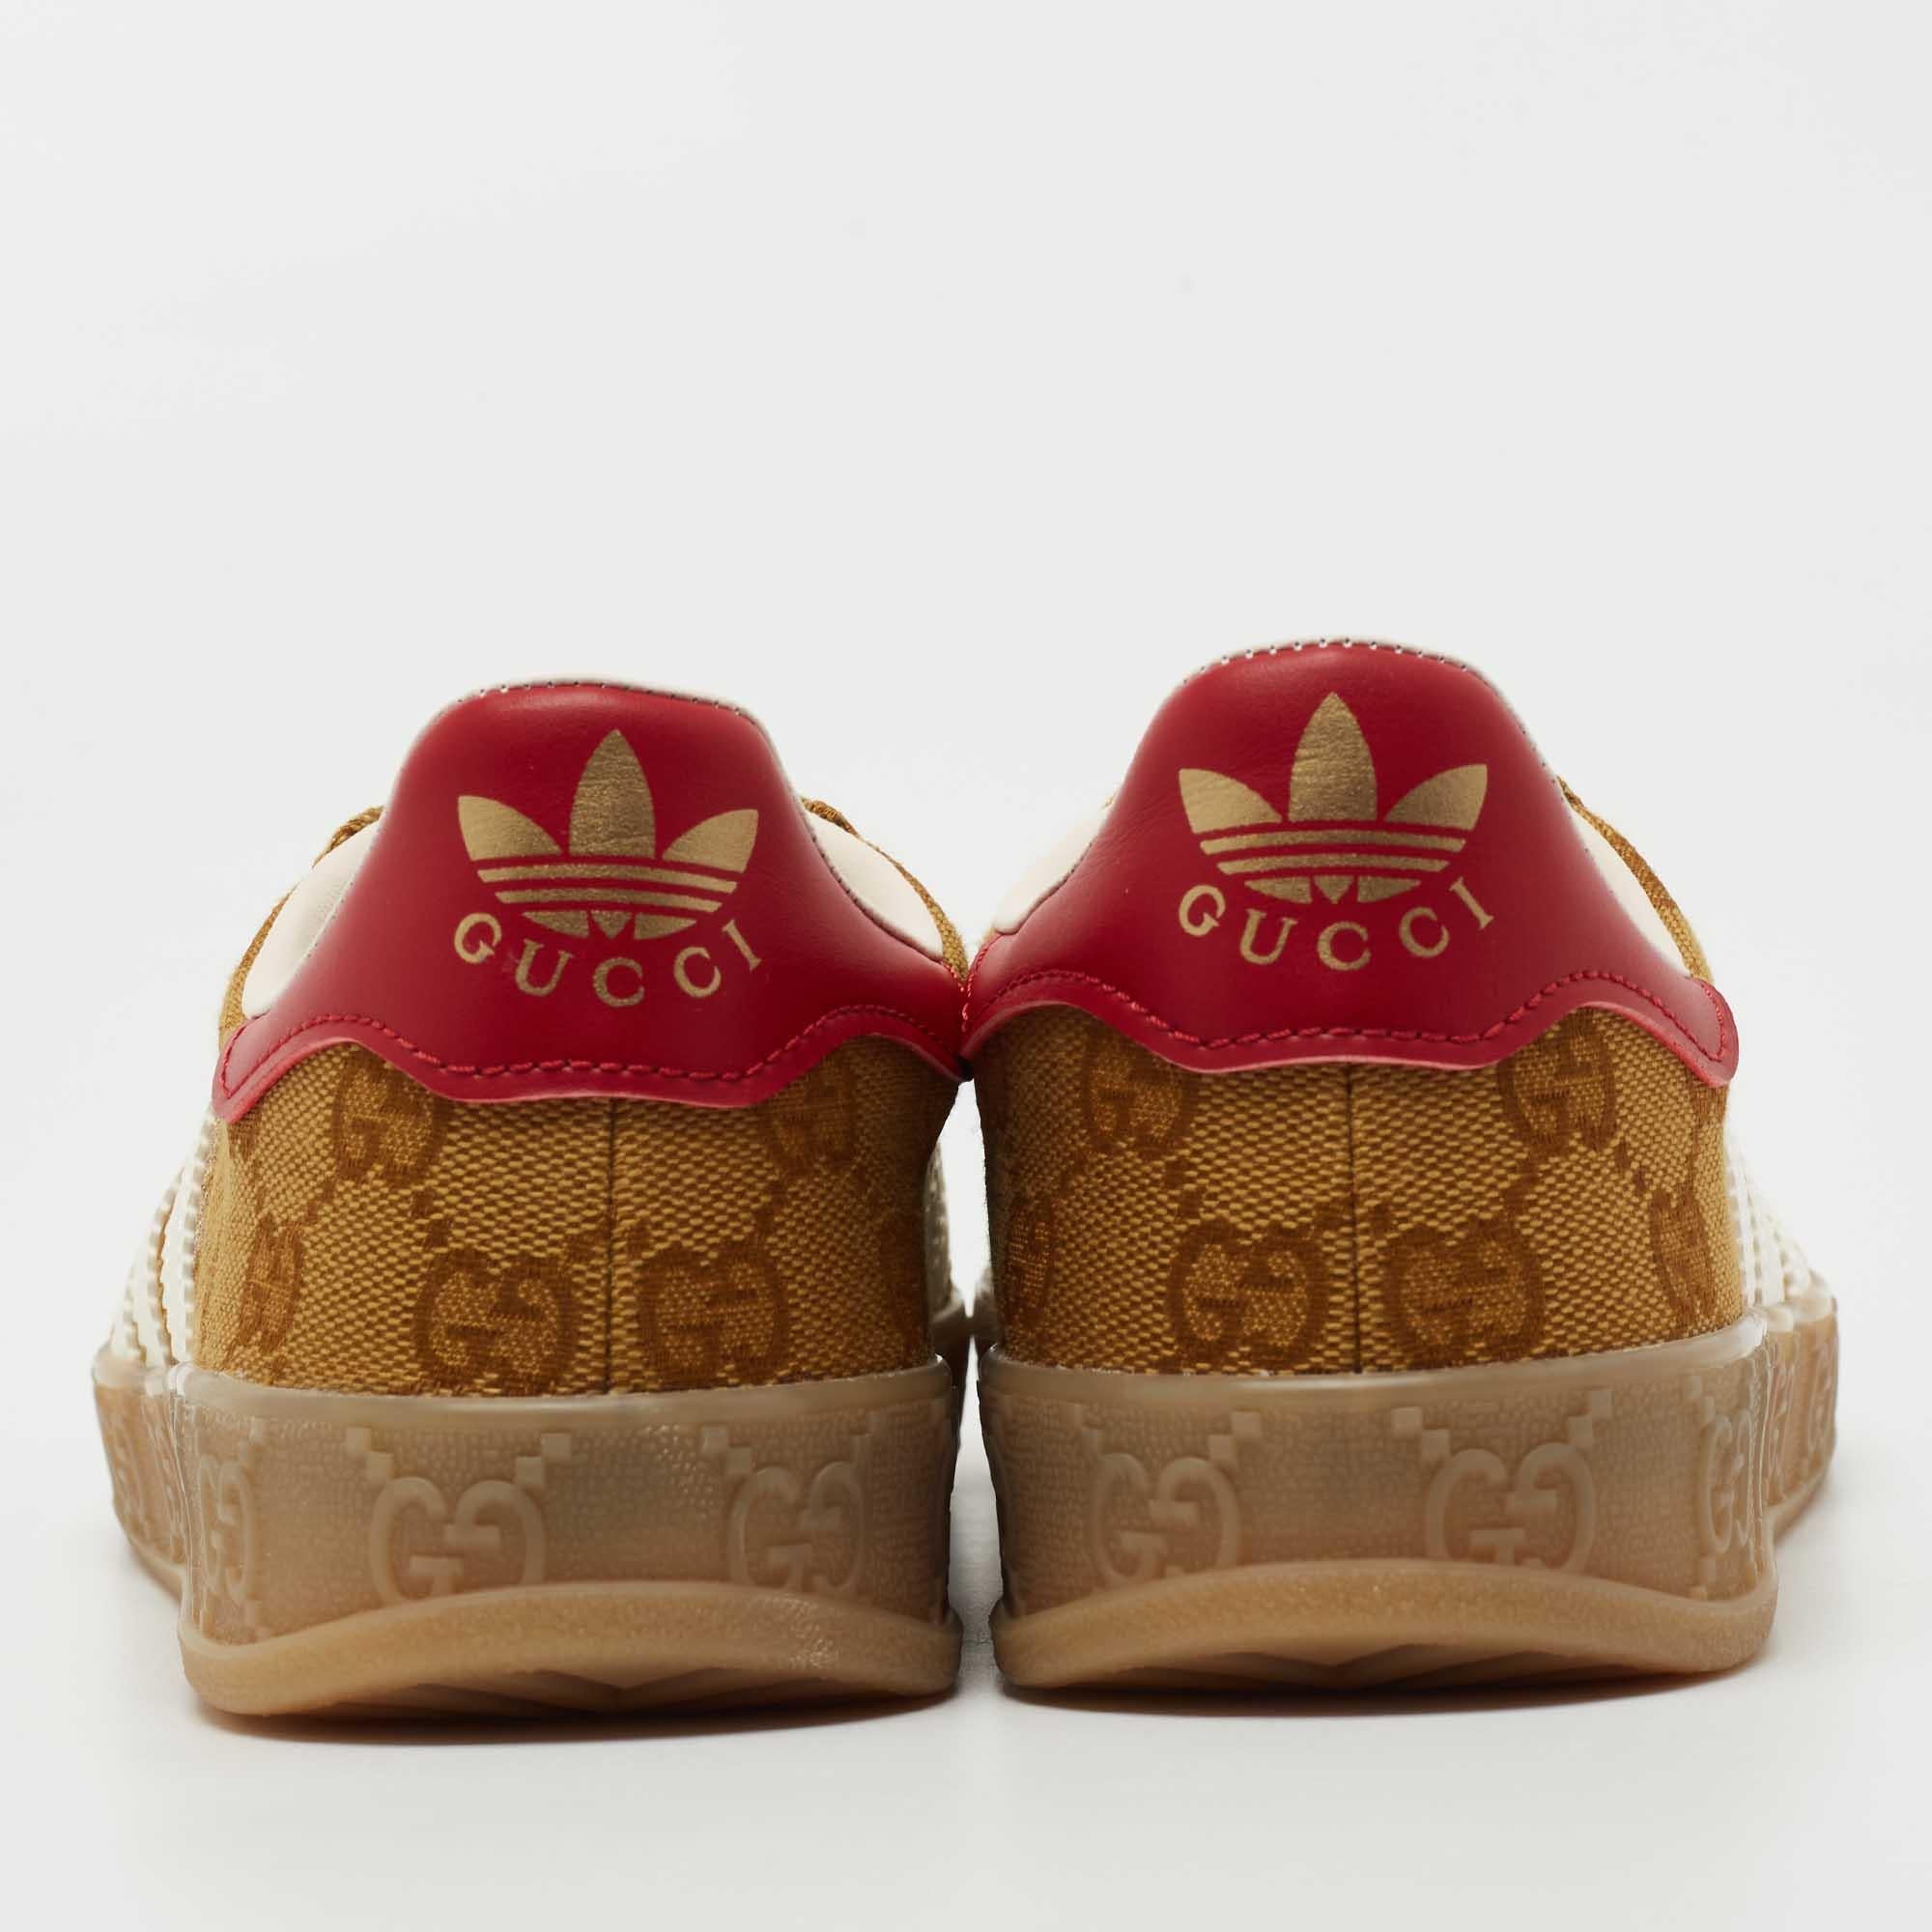 Adidas x Gucci Tricolor GG Canvas and Leather Gazelle Sneakers Size 36 2